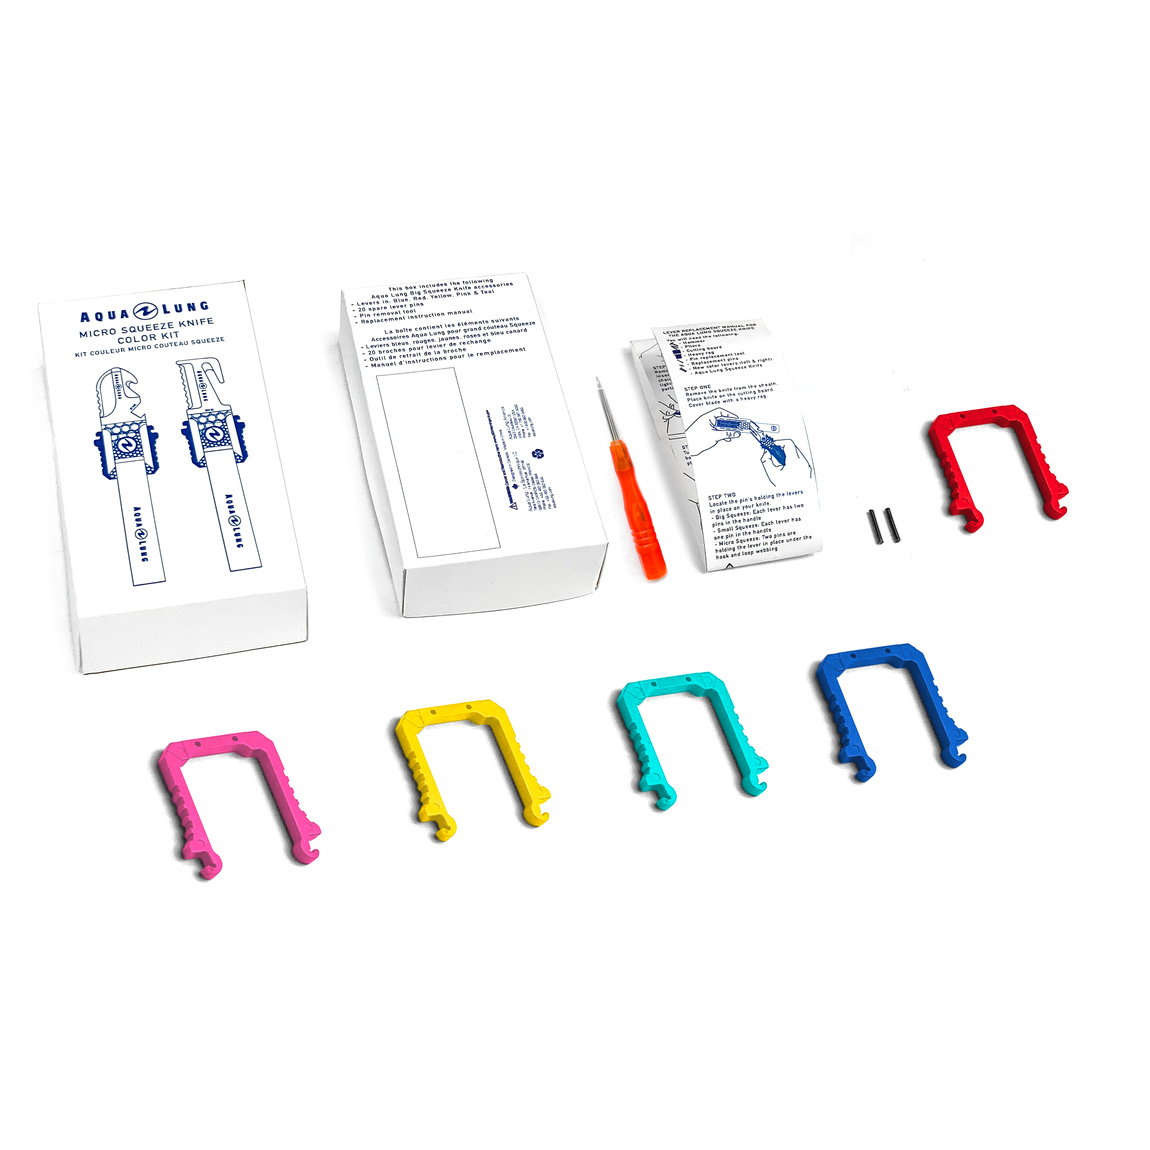 Micro Squeeze Color Kit